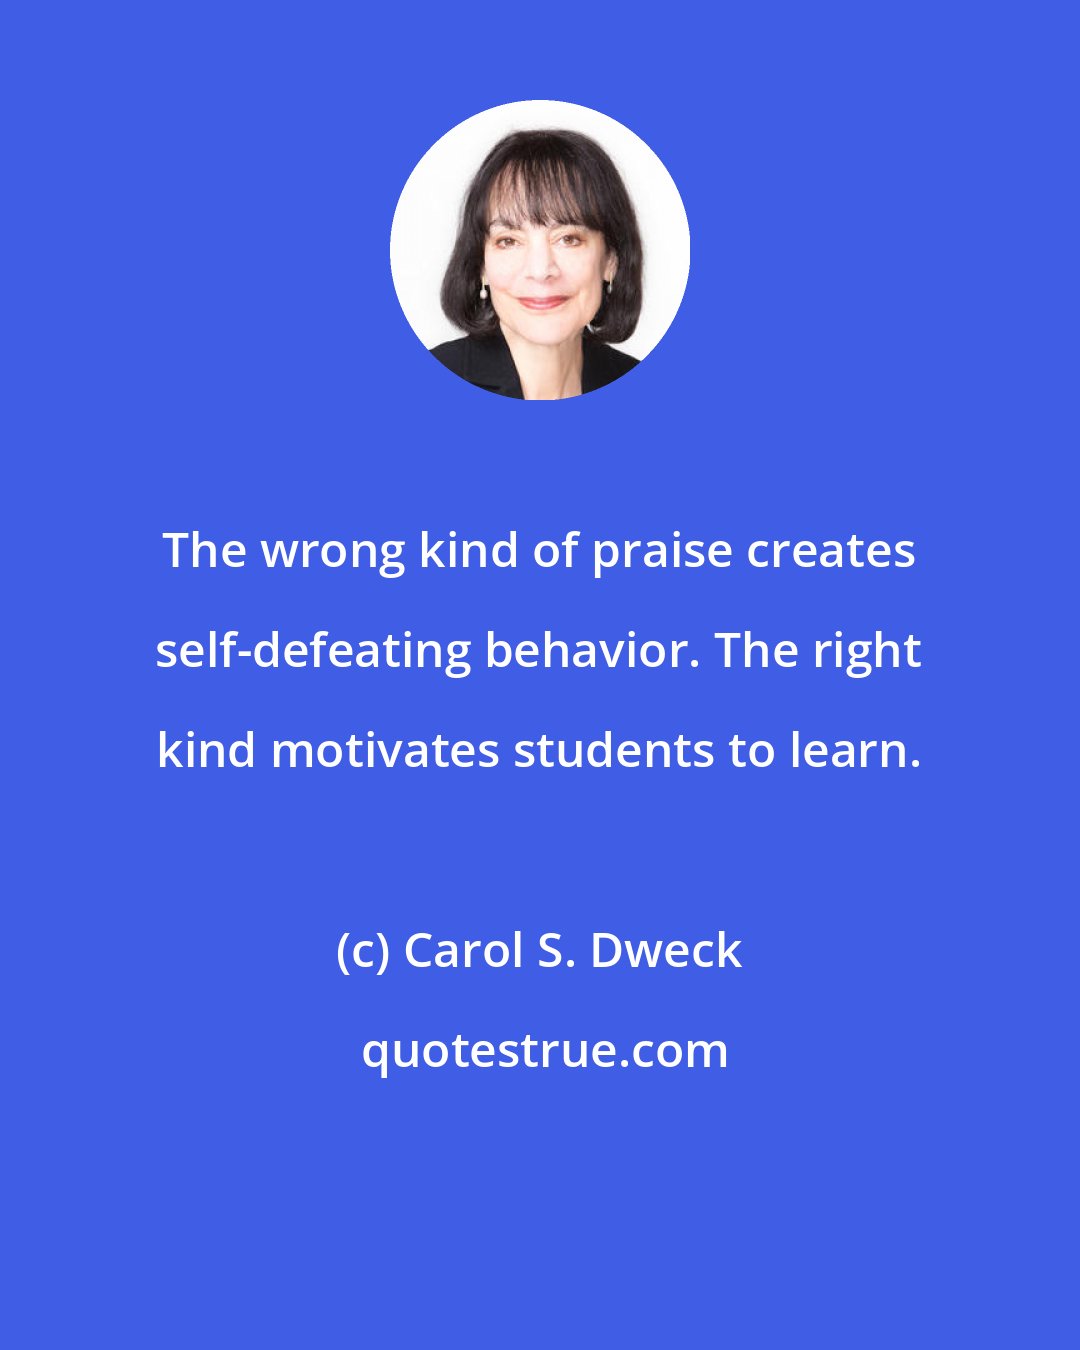 Carol S. Dweck: The wrong kind of praise creates self-defeating behavior. The right kind motivates students to learn.